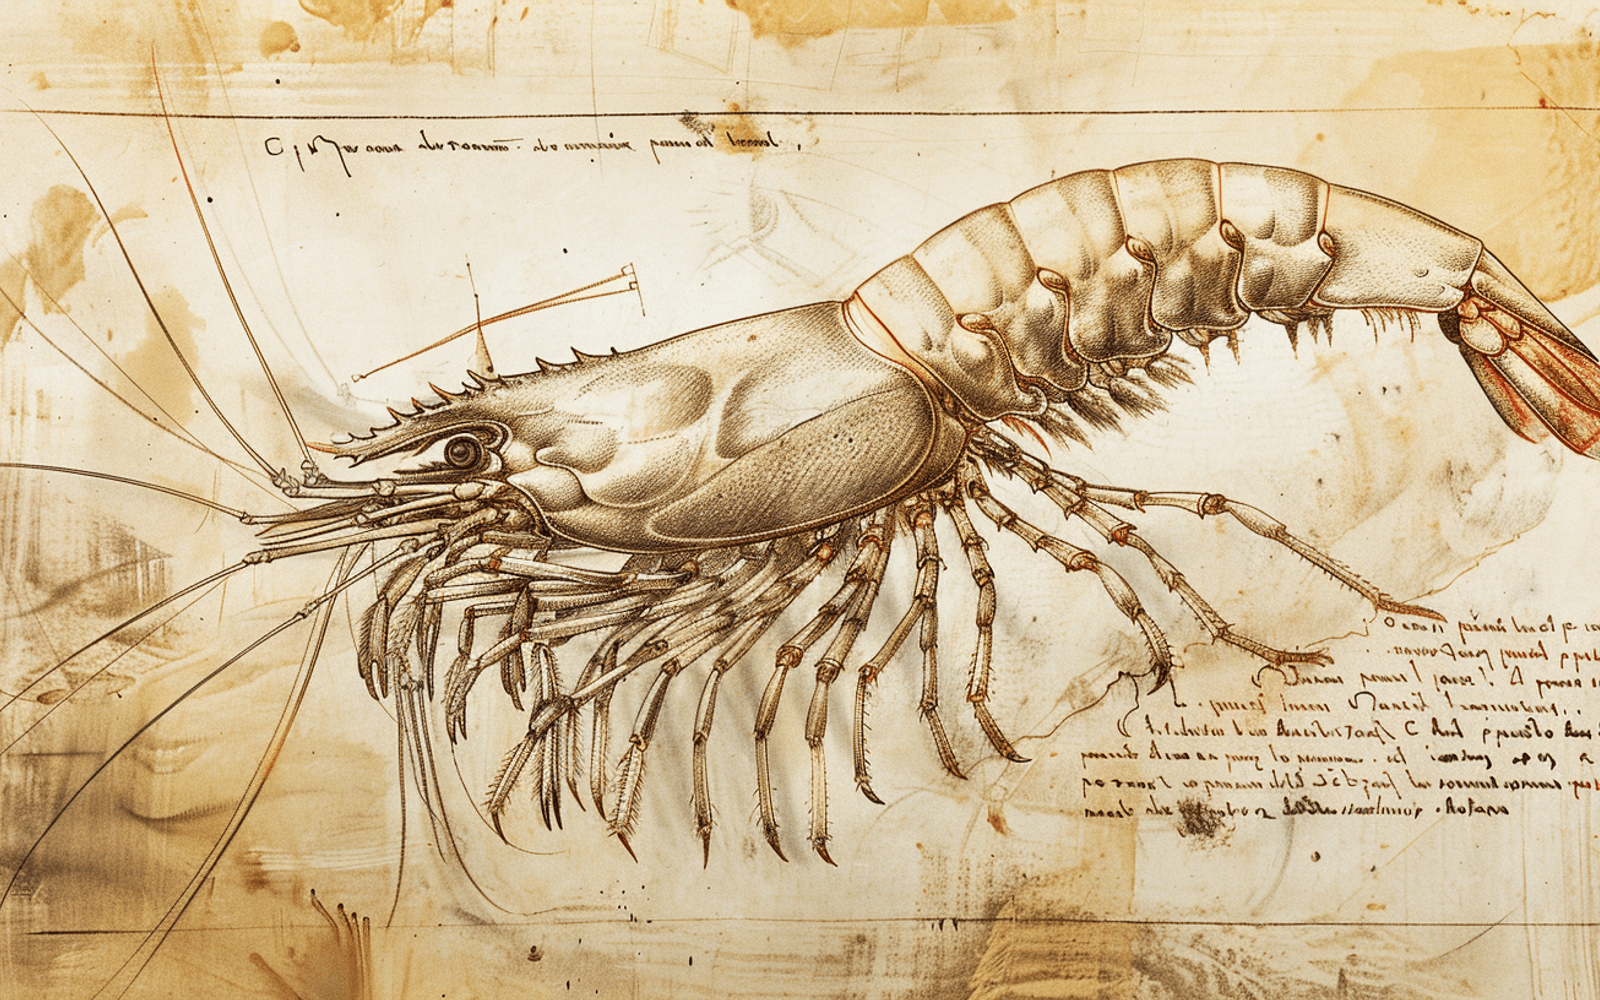 A fictional drawing of a shrimp in the style of da vinci